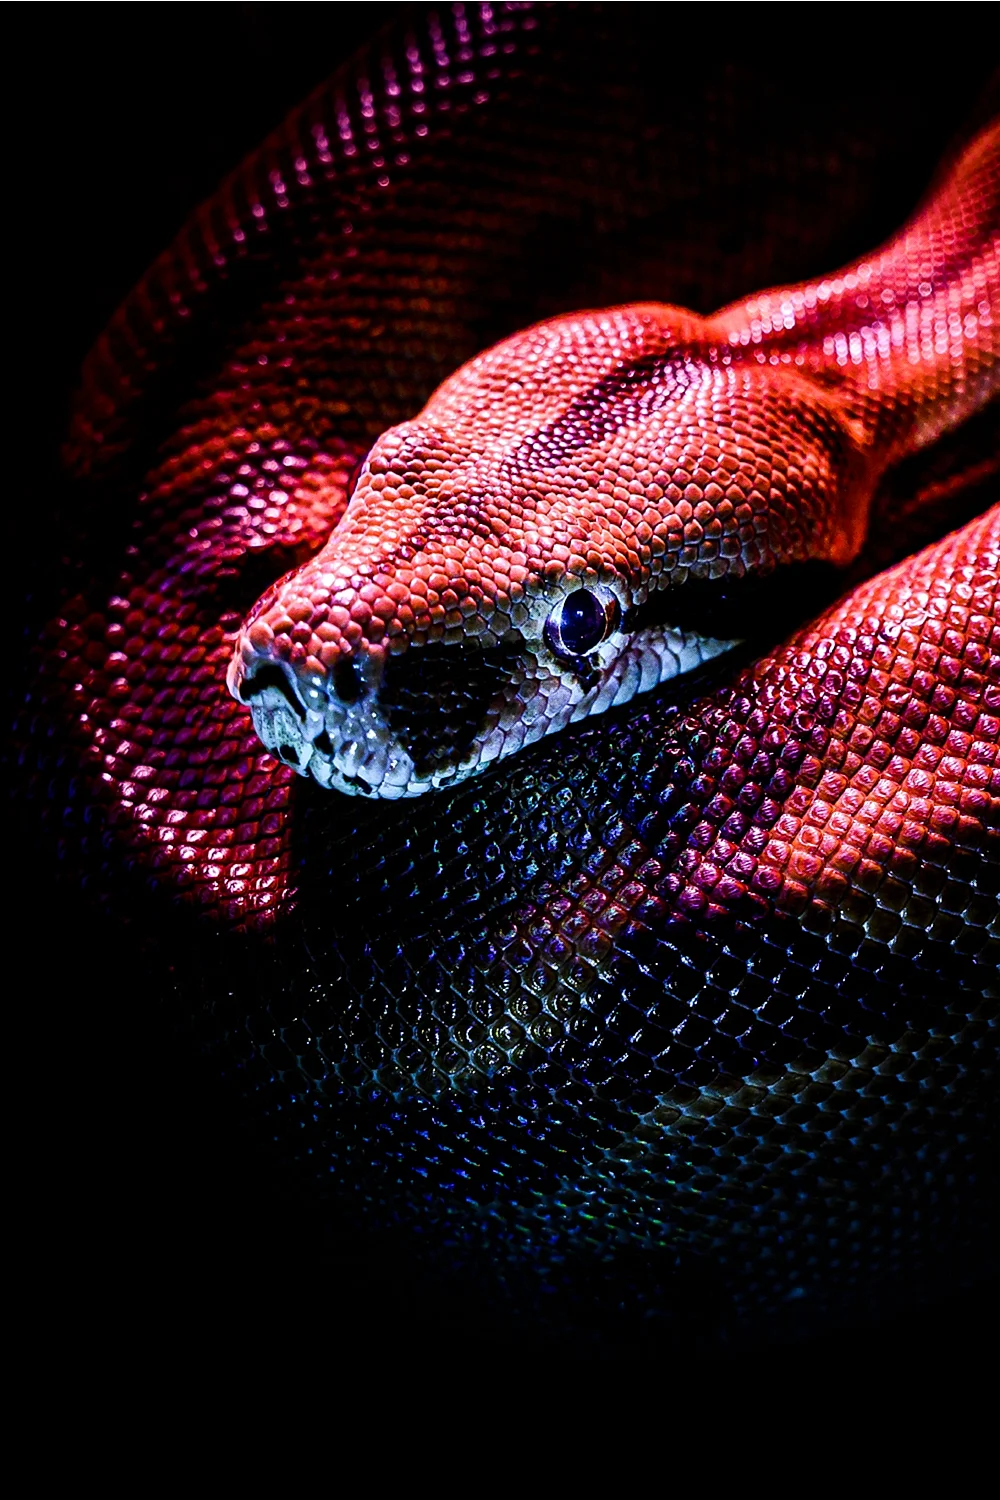 Snake Reptiles Wallpaper For iPhone